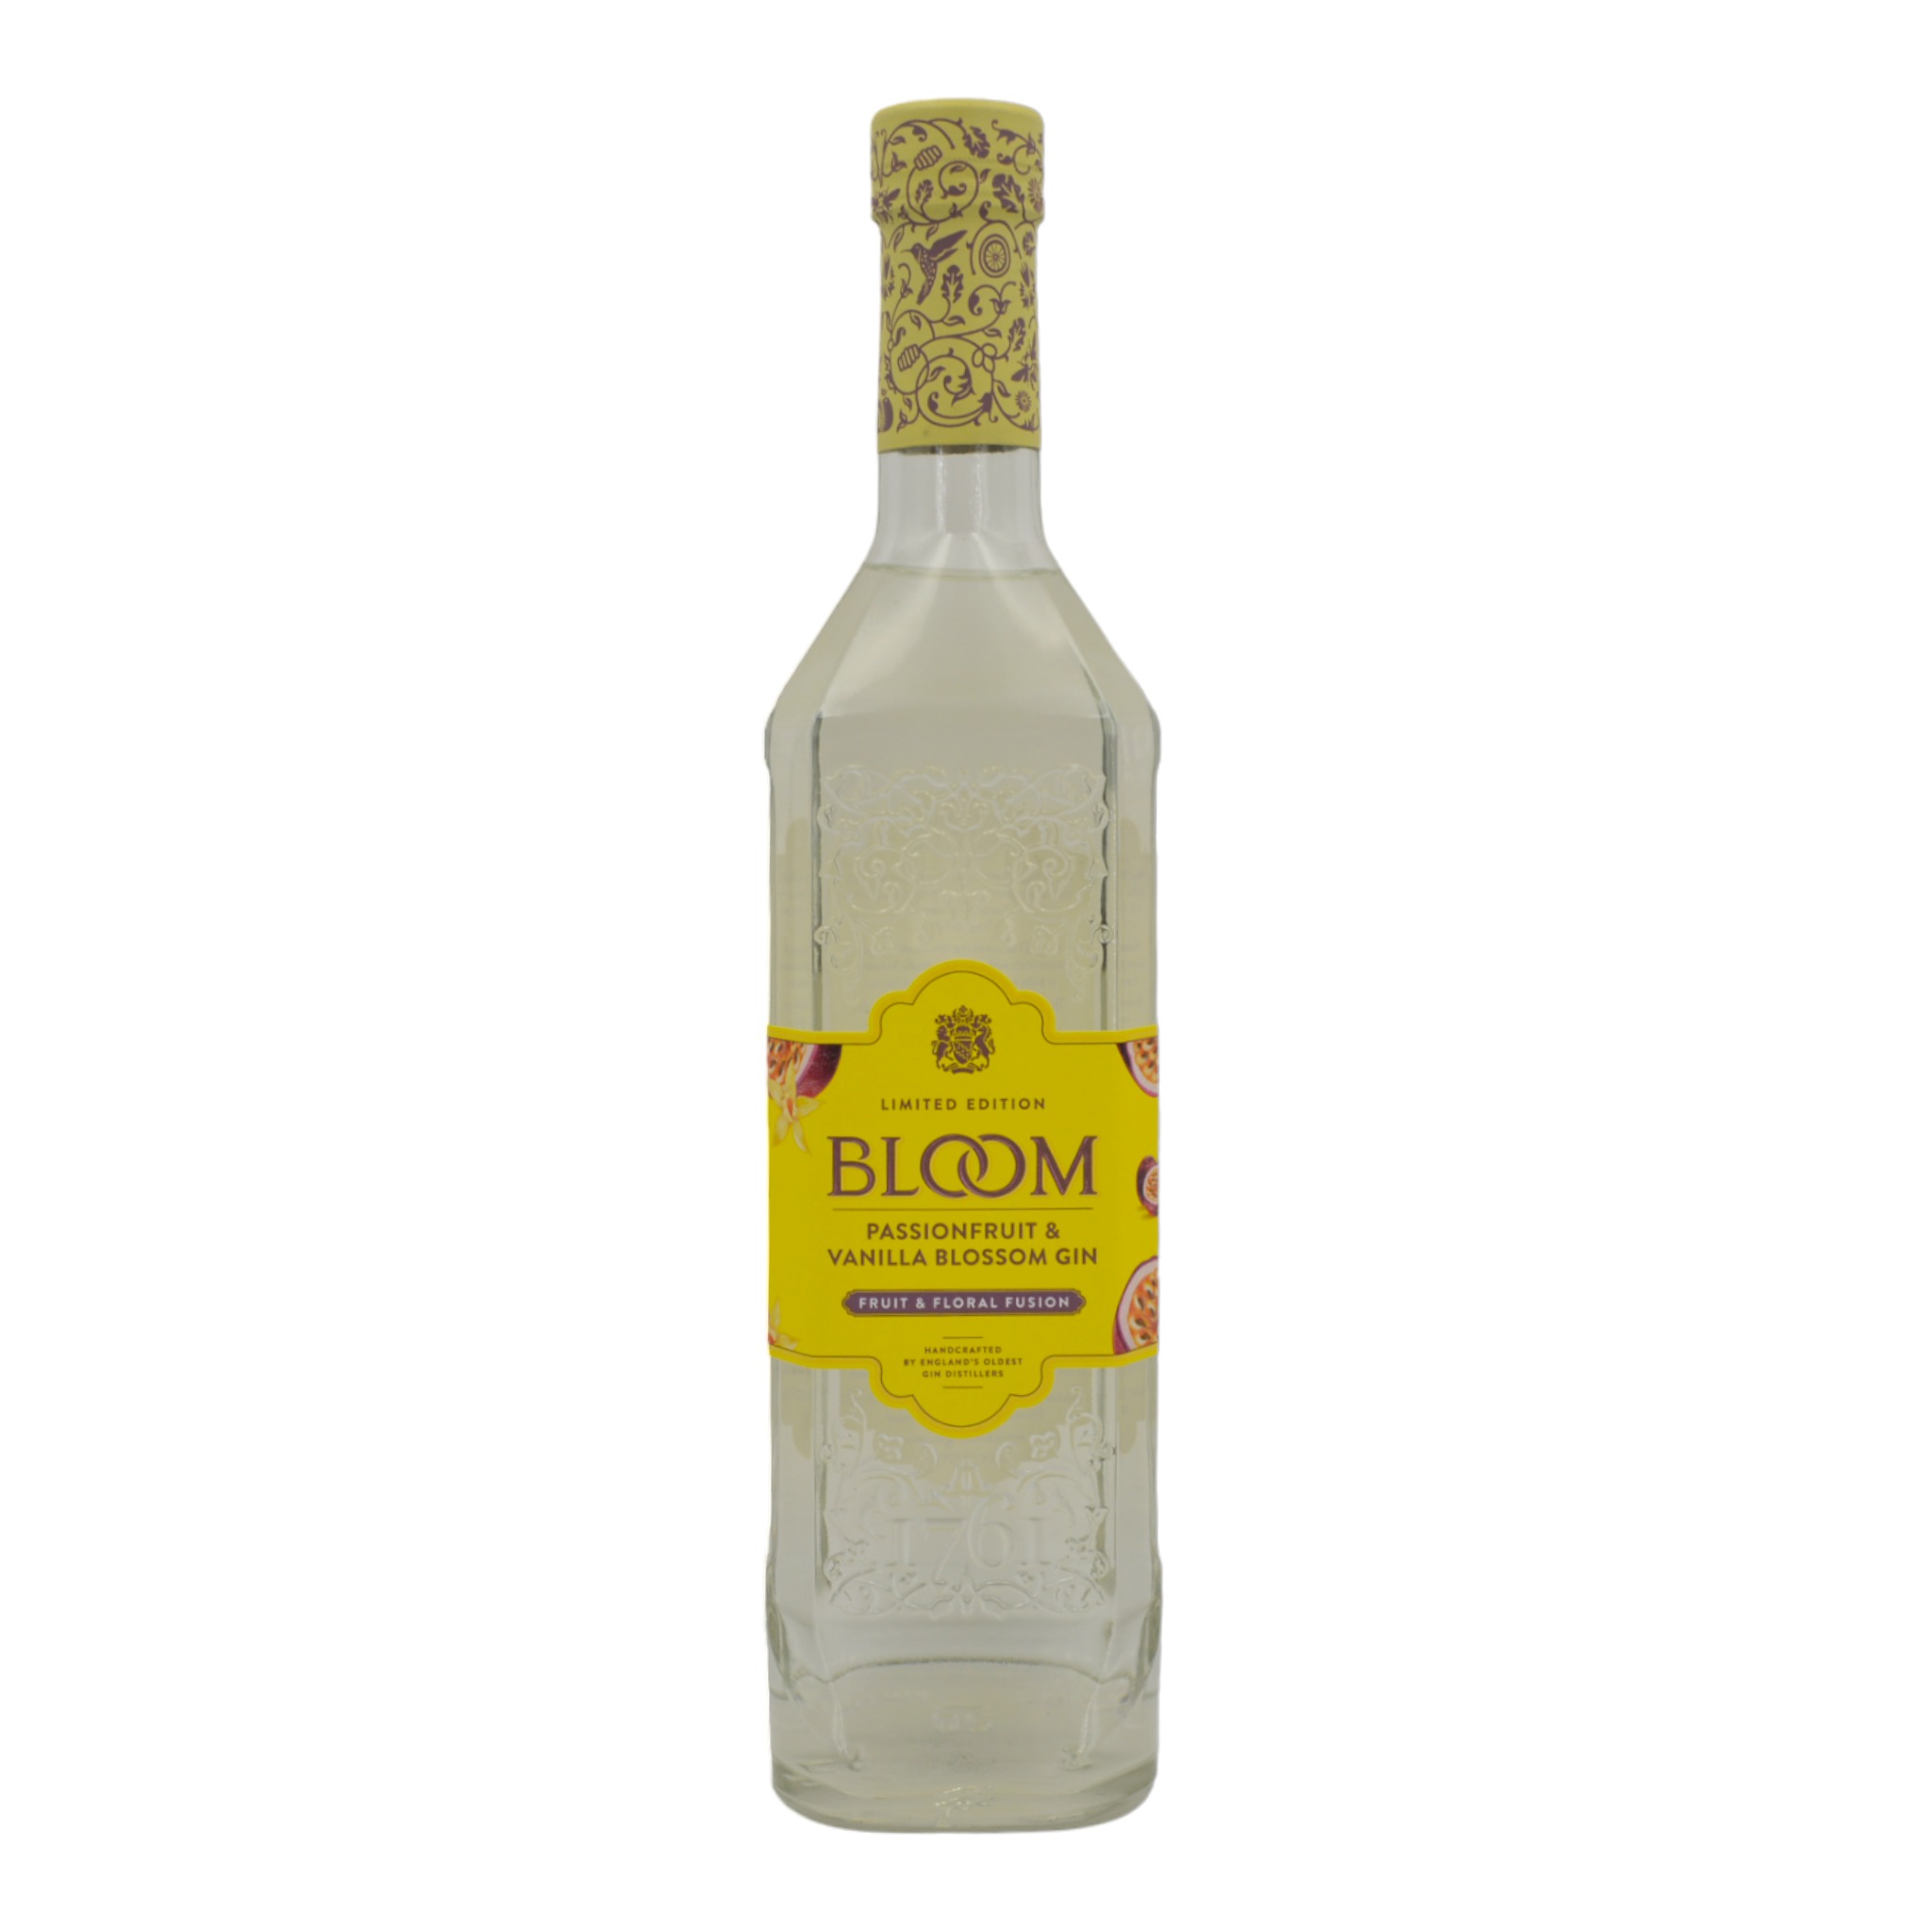 5010296010763Bloom Passionfruit and Vanilla Blossom Gin Limited Edition f - Weinhaus-Buecker